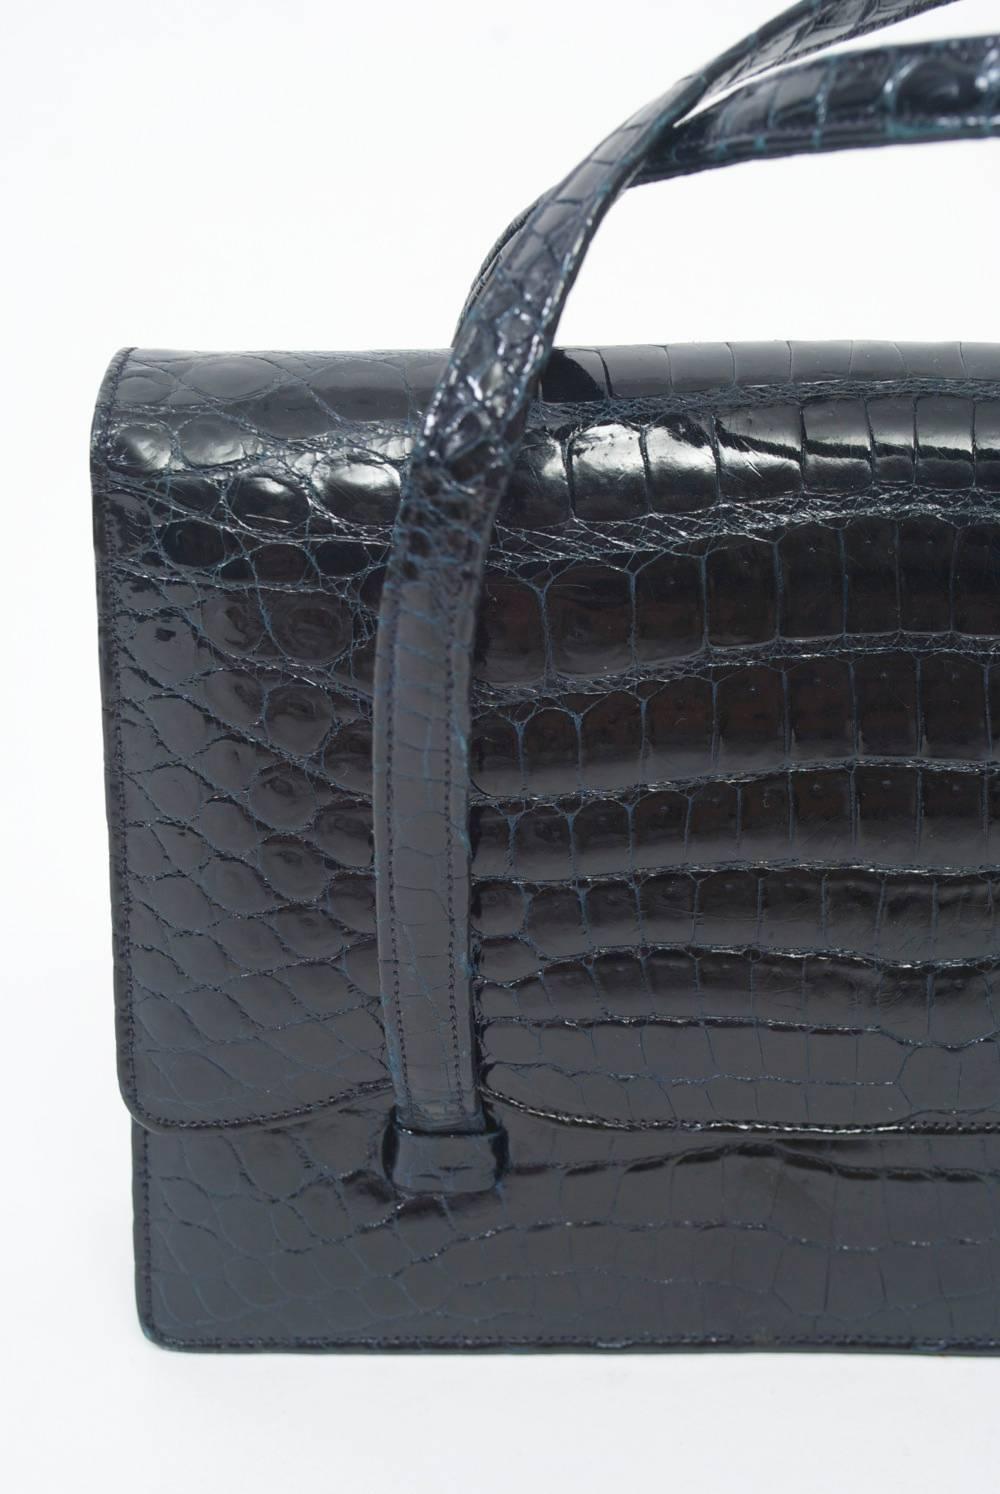 Small 1960s crocodile handbag from Artbag on Madison Avenue, NY, features an envelope style top with snap closure and double handles that attach below the flap. Black leather interior with zippered pocket on one side and open pocket with mirror on